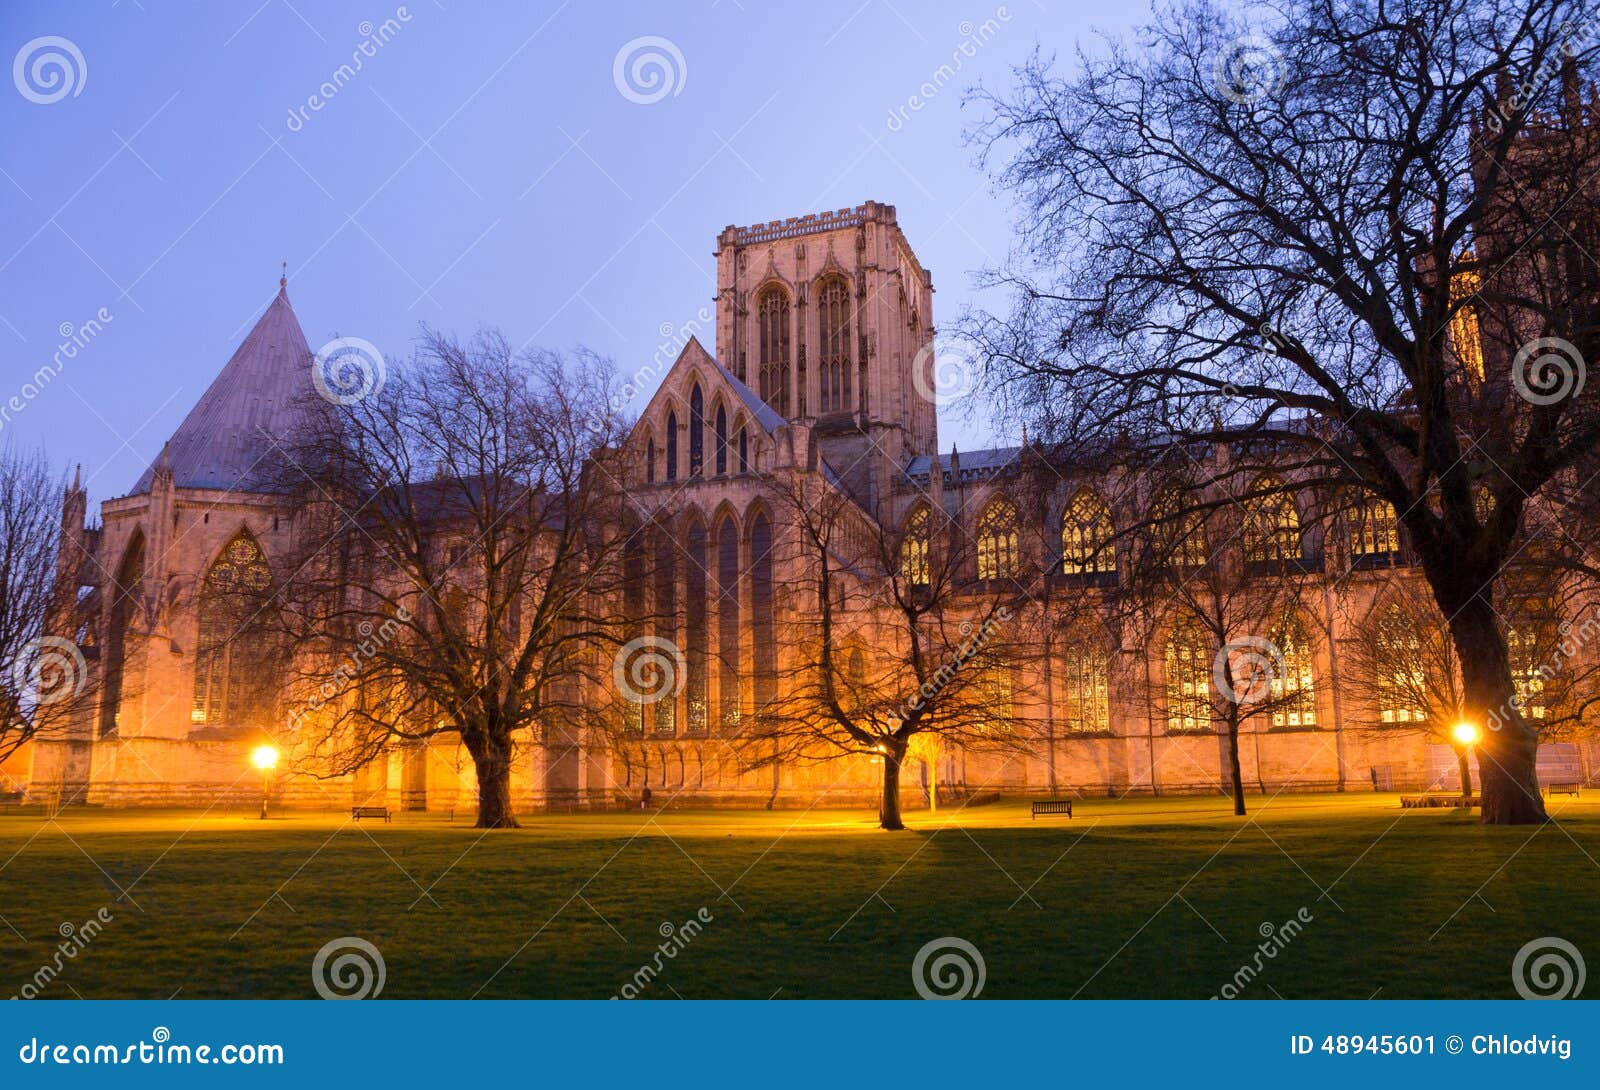 york minster cathedral park at night